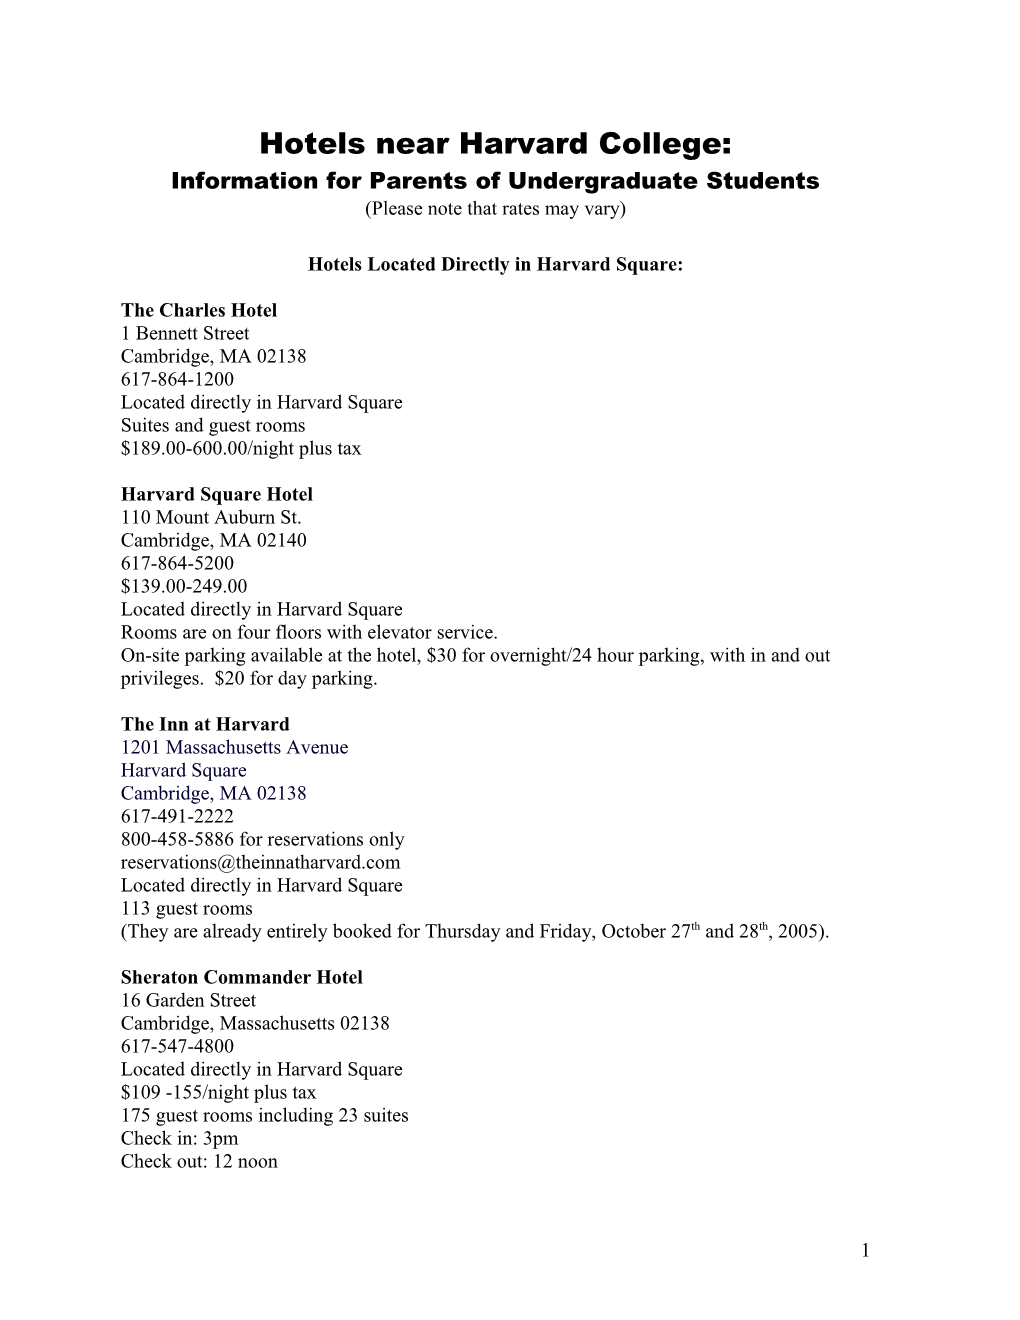 Information for Parents of Undergraduate Students